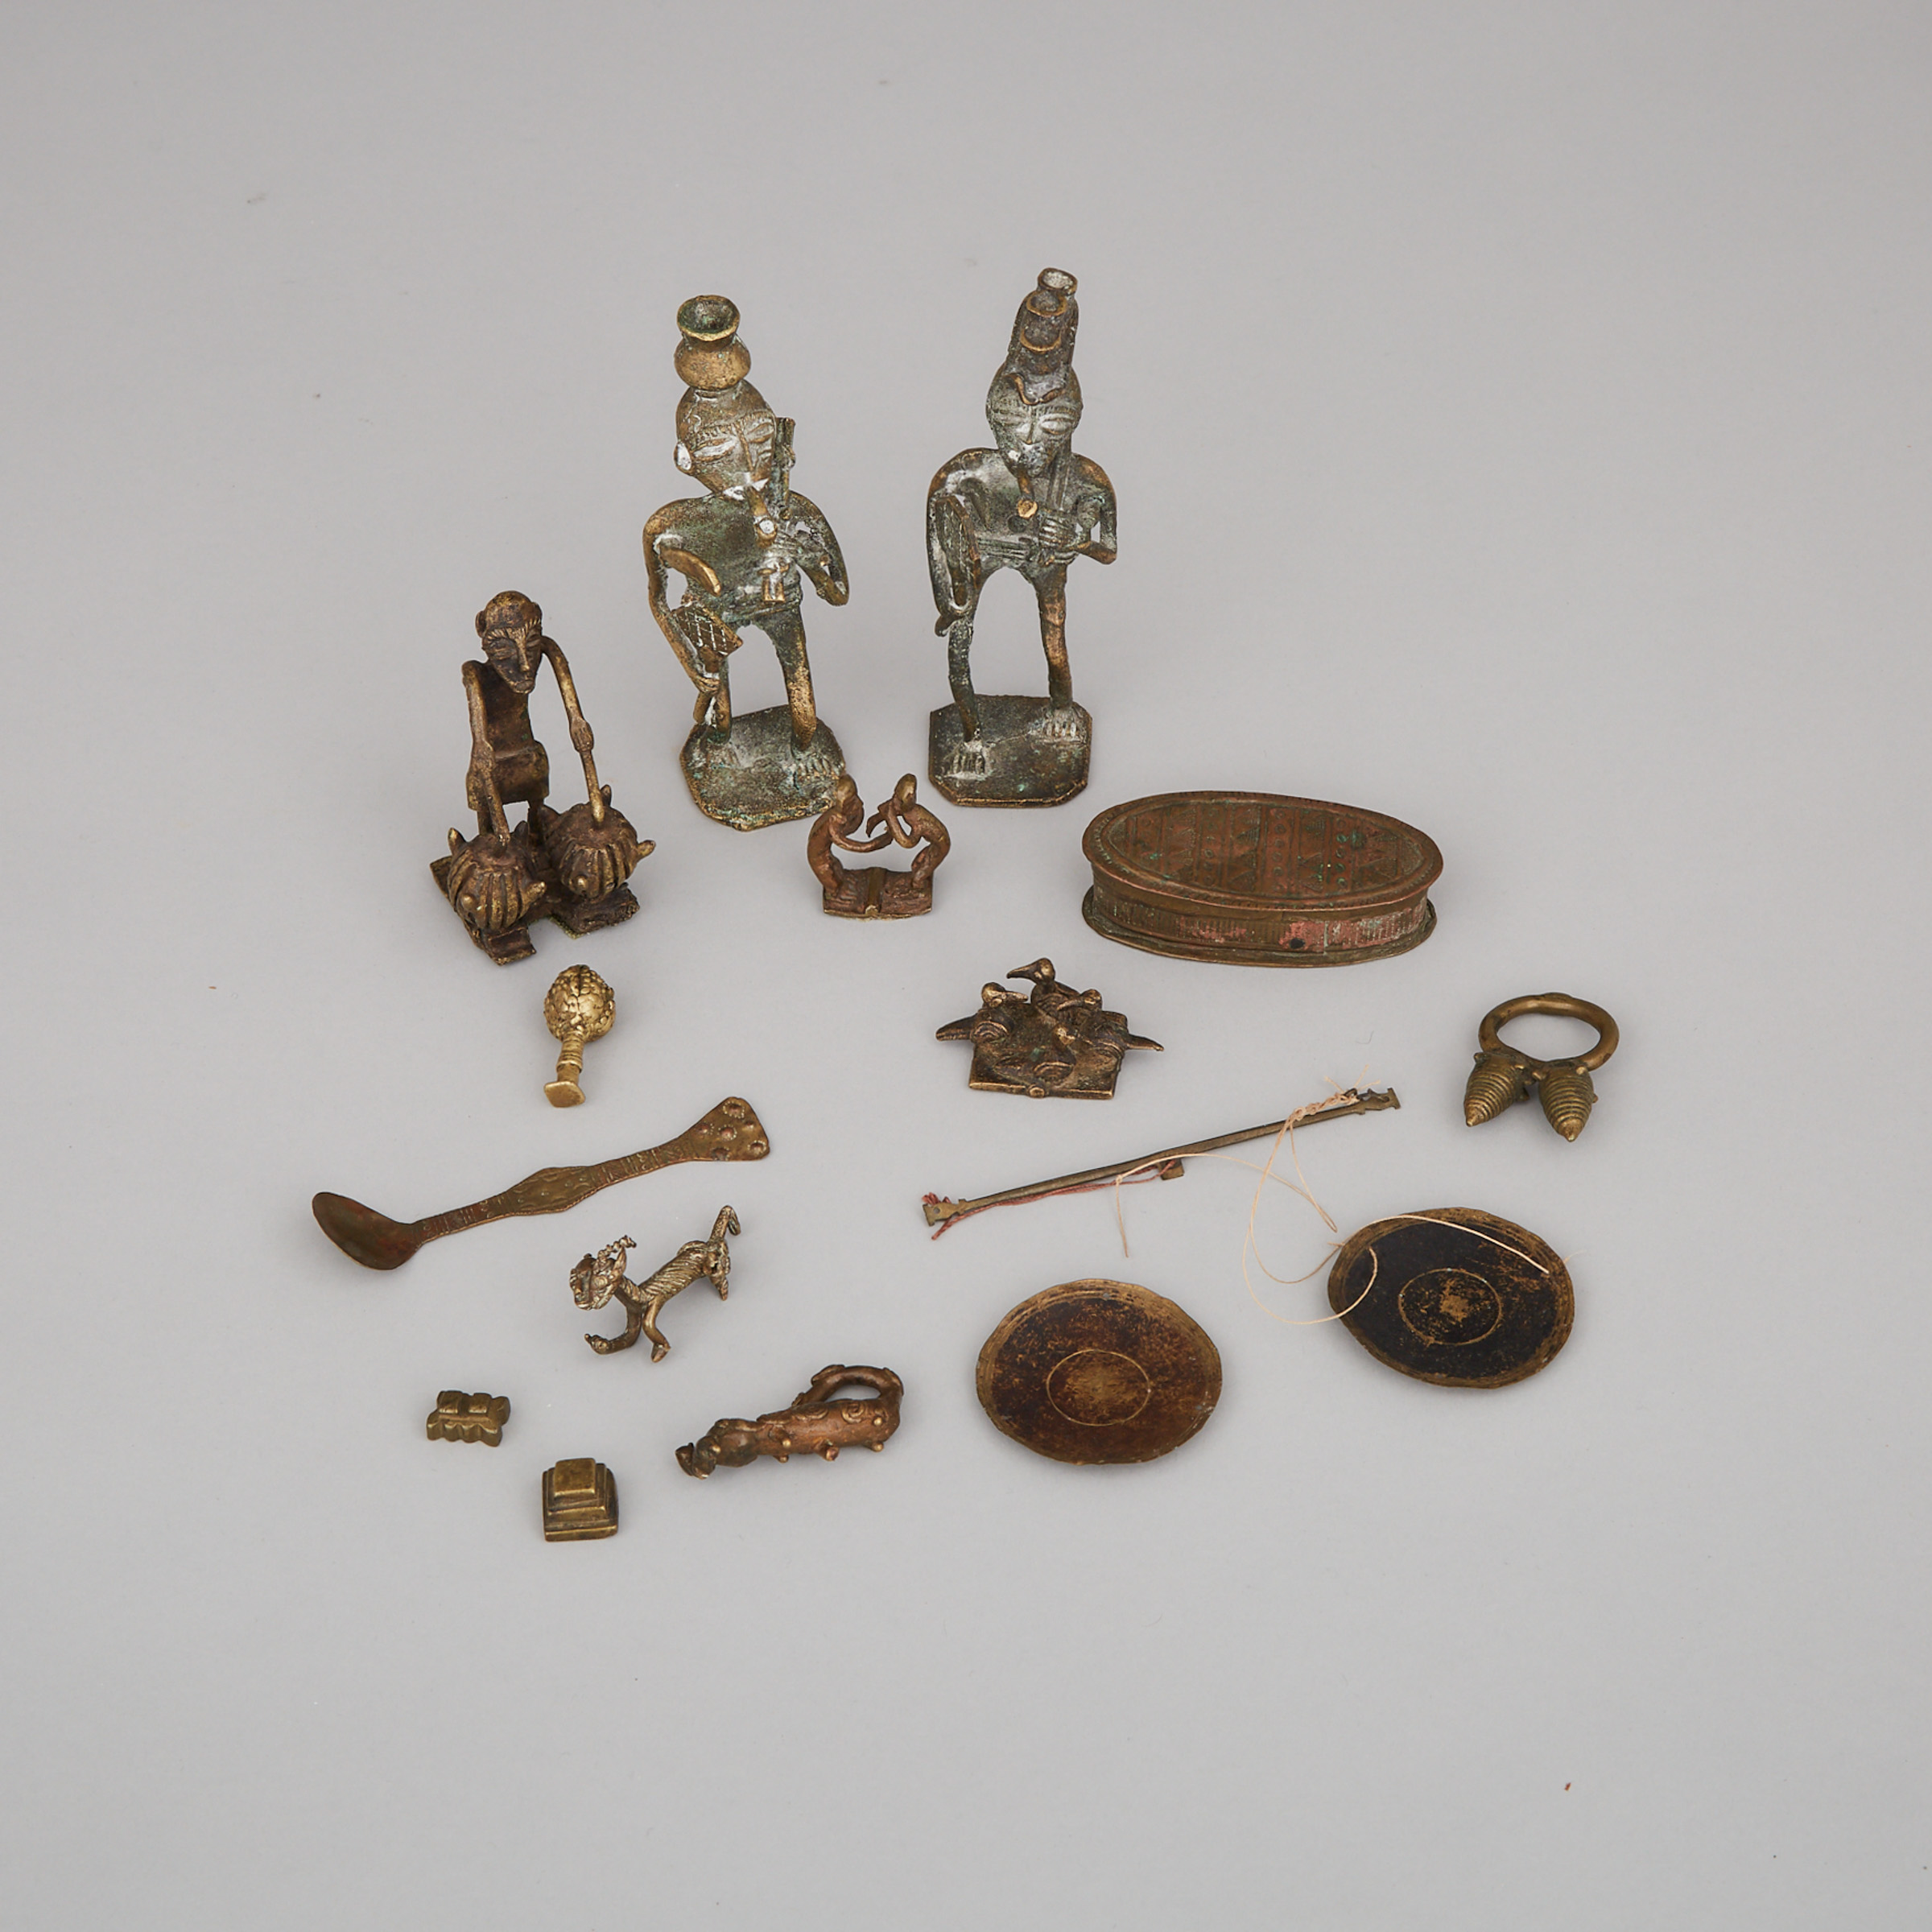 Collection of Ashanti Gold Weighing Accessories, 19th/early 20th century